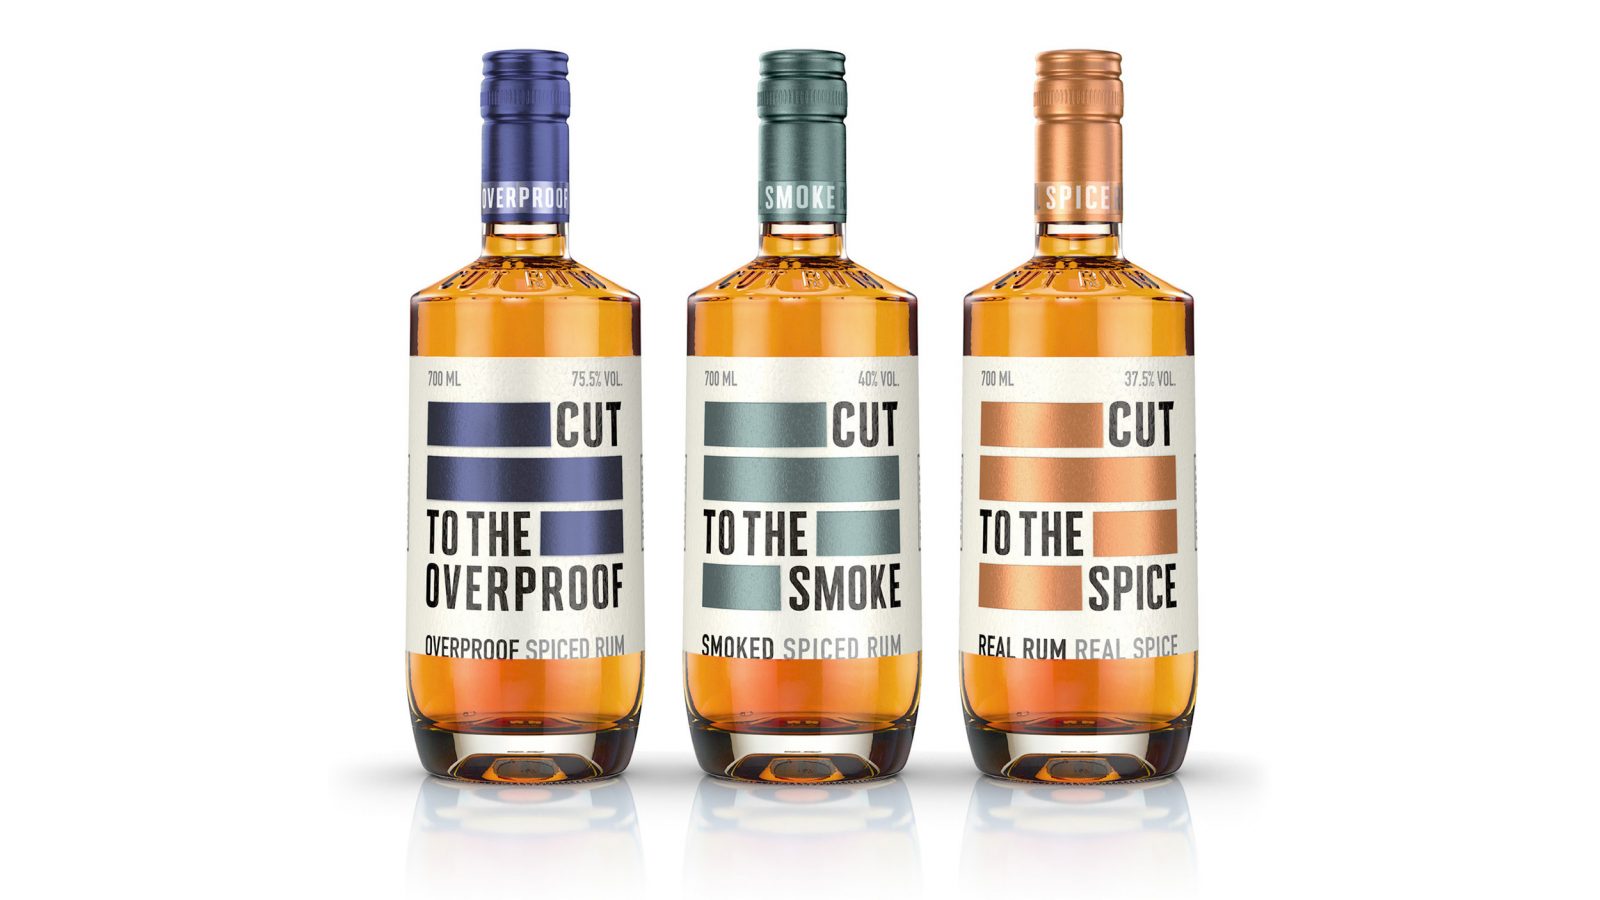 Brand Positioning, Identity and Packaging Design for a Disruptive New Rum Brand